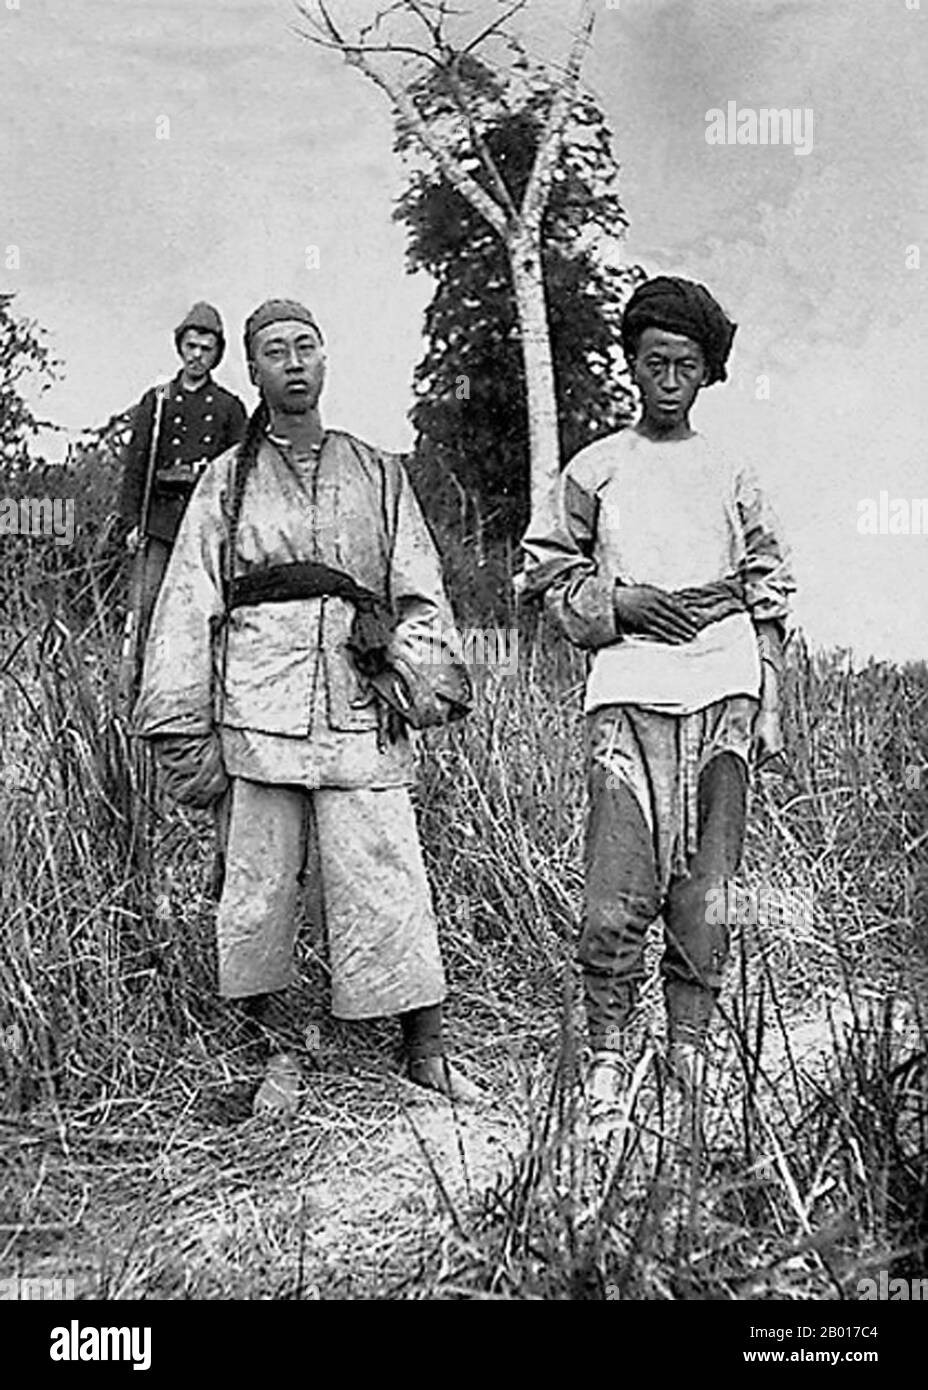 Vietnam: Two Black Flag militia and a French rifleman, Tuyen Quang, Tonkin, 1885.  The Black Flag Army (Chinese: Hēiqí Jūn; Vietnamese: Quân cờ đen) was a splinter remnant of a bandit group recruited largely from soldiers of ethnic Zhuang background, who crossed the border from Guangxi province of China into Upper Tonkin, in the Empire of Annam (Vietnam) in 1865. They became known mainly for their fights against French forces in cooperation with both Vietnamese and Chinese authorities. The Black Flag Army is so named because of their leader Liu Yongfu's preference for using black command flags Stock Photo